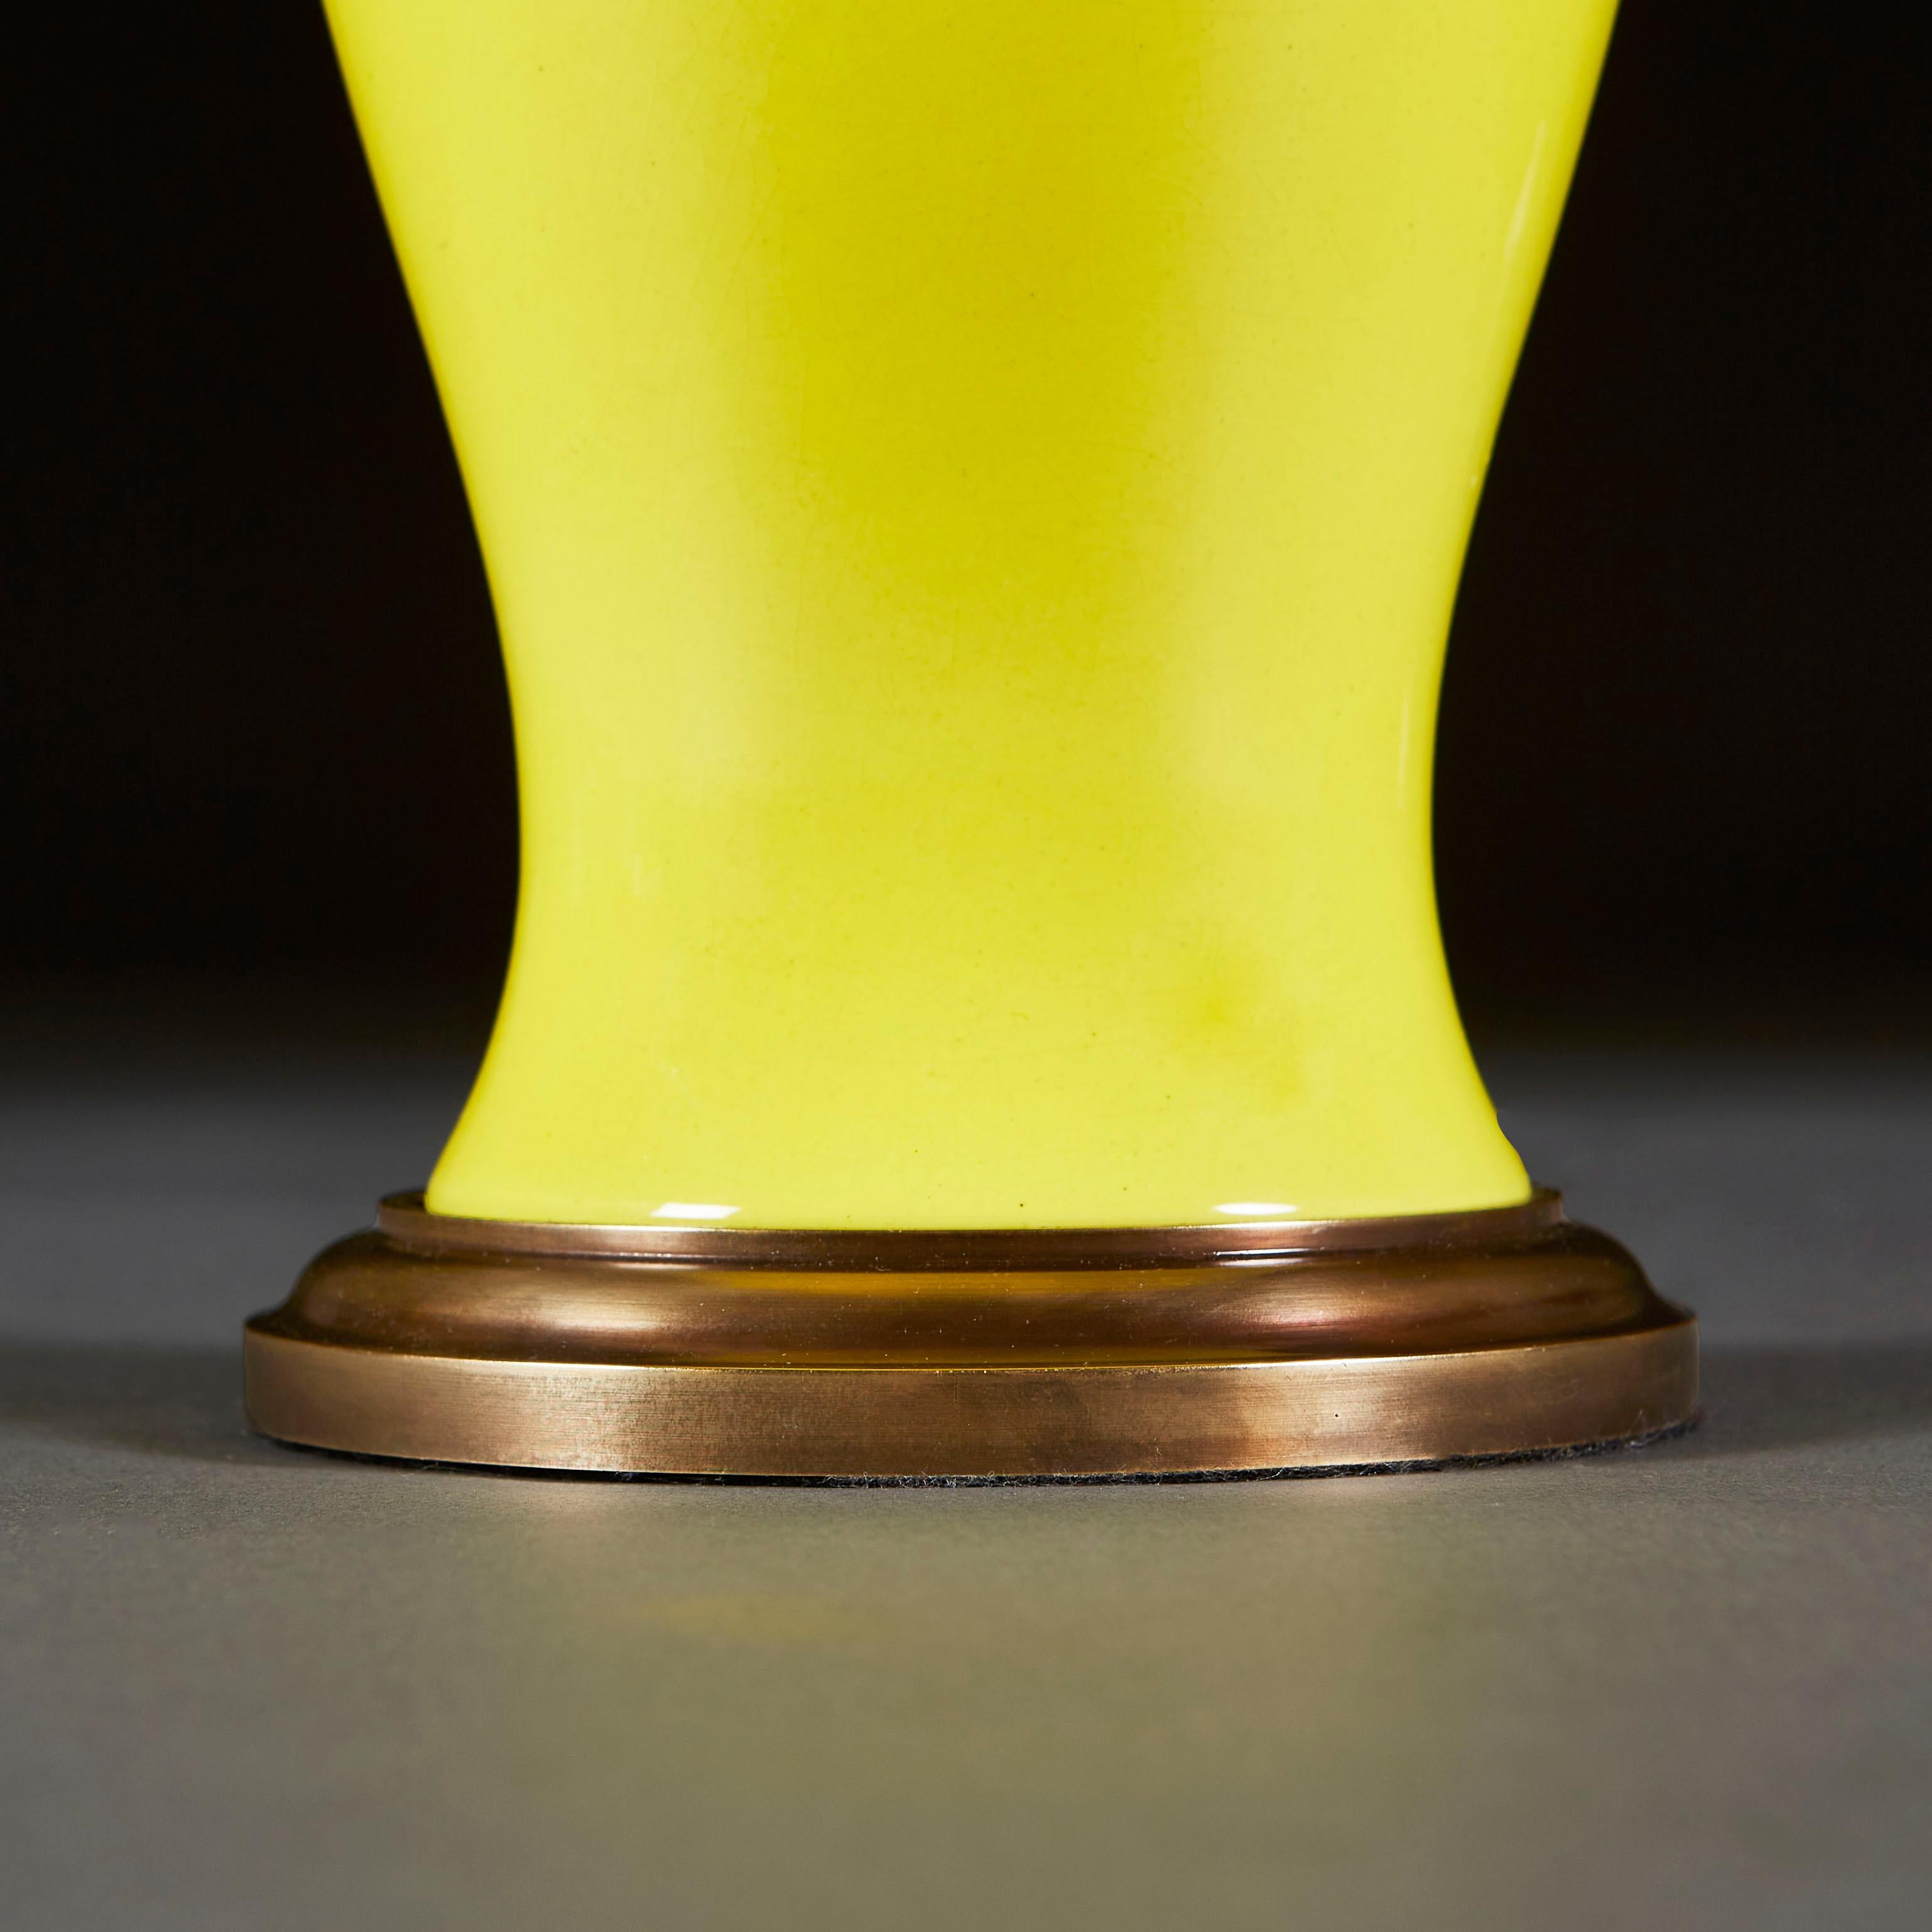 Glazed Pair of Bright Yellow Ceramic Vases as Table Lamps with Brass Bases